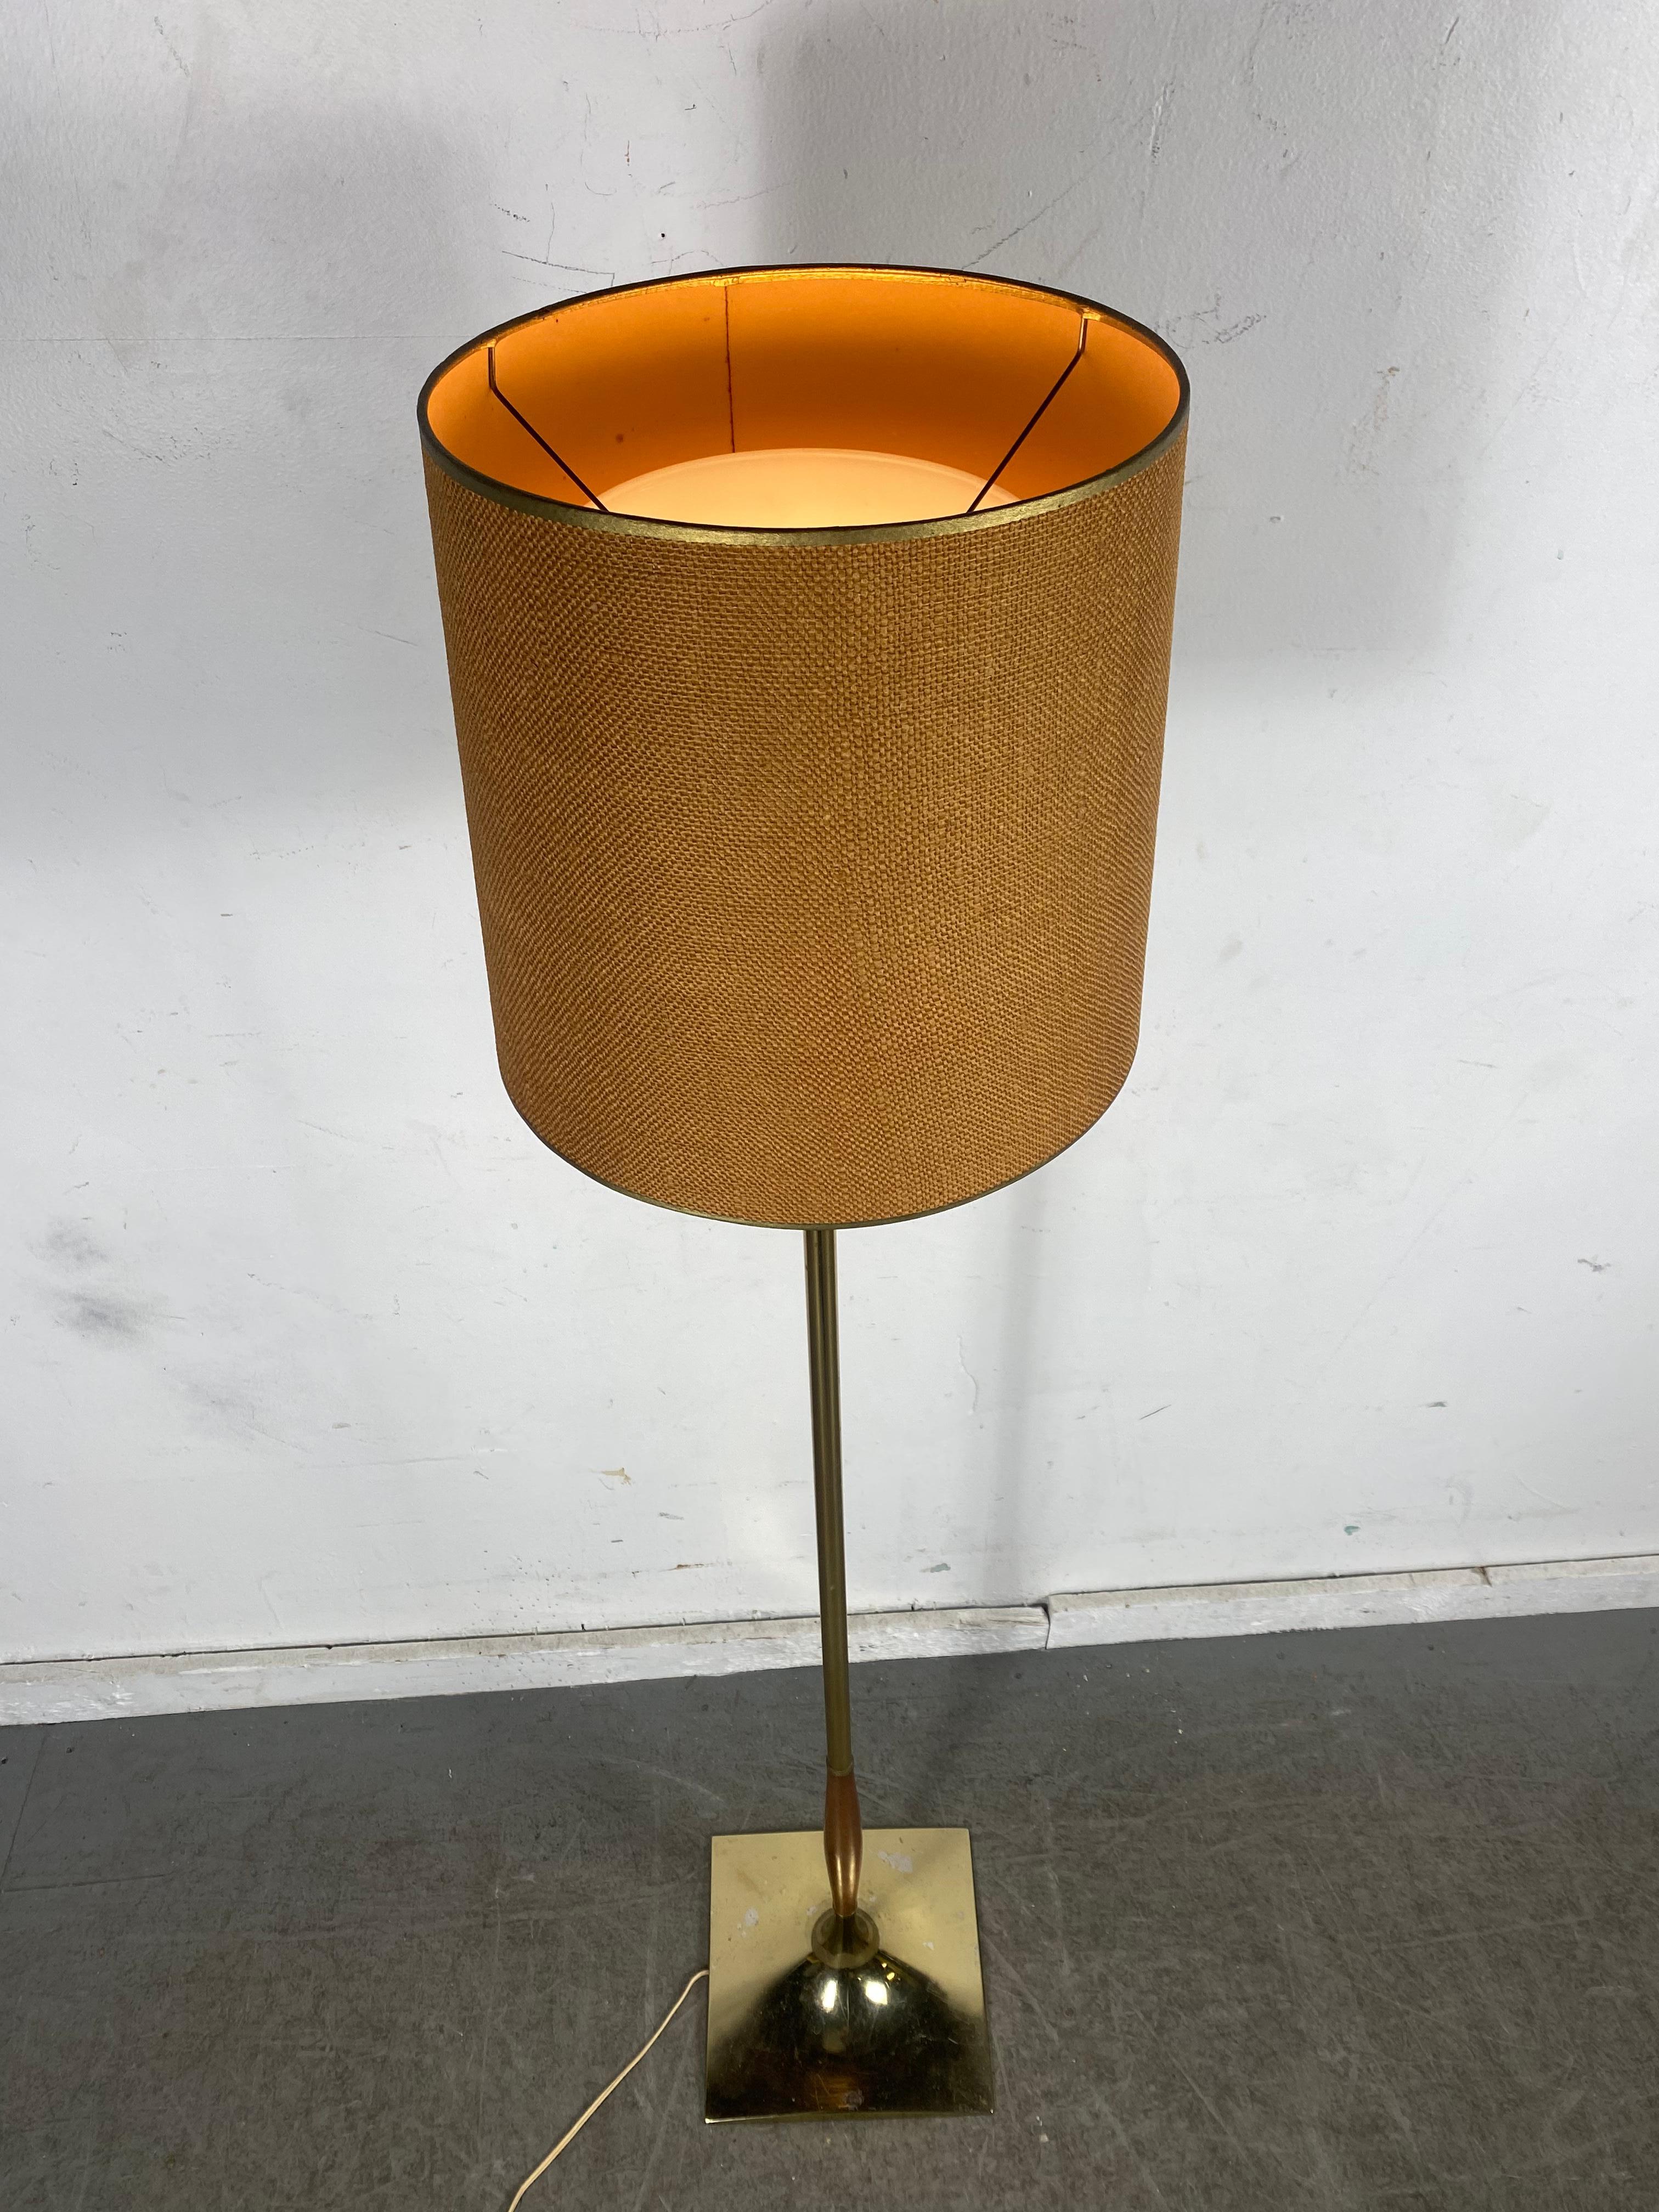 Classic Modernist floor lamp by Laurel Lamp Company, minor wear to brushed brass base. Enhance any Mid-Century Modern environment.